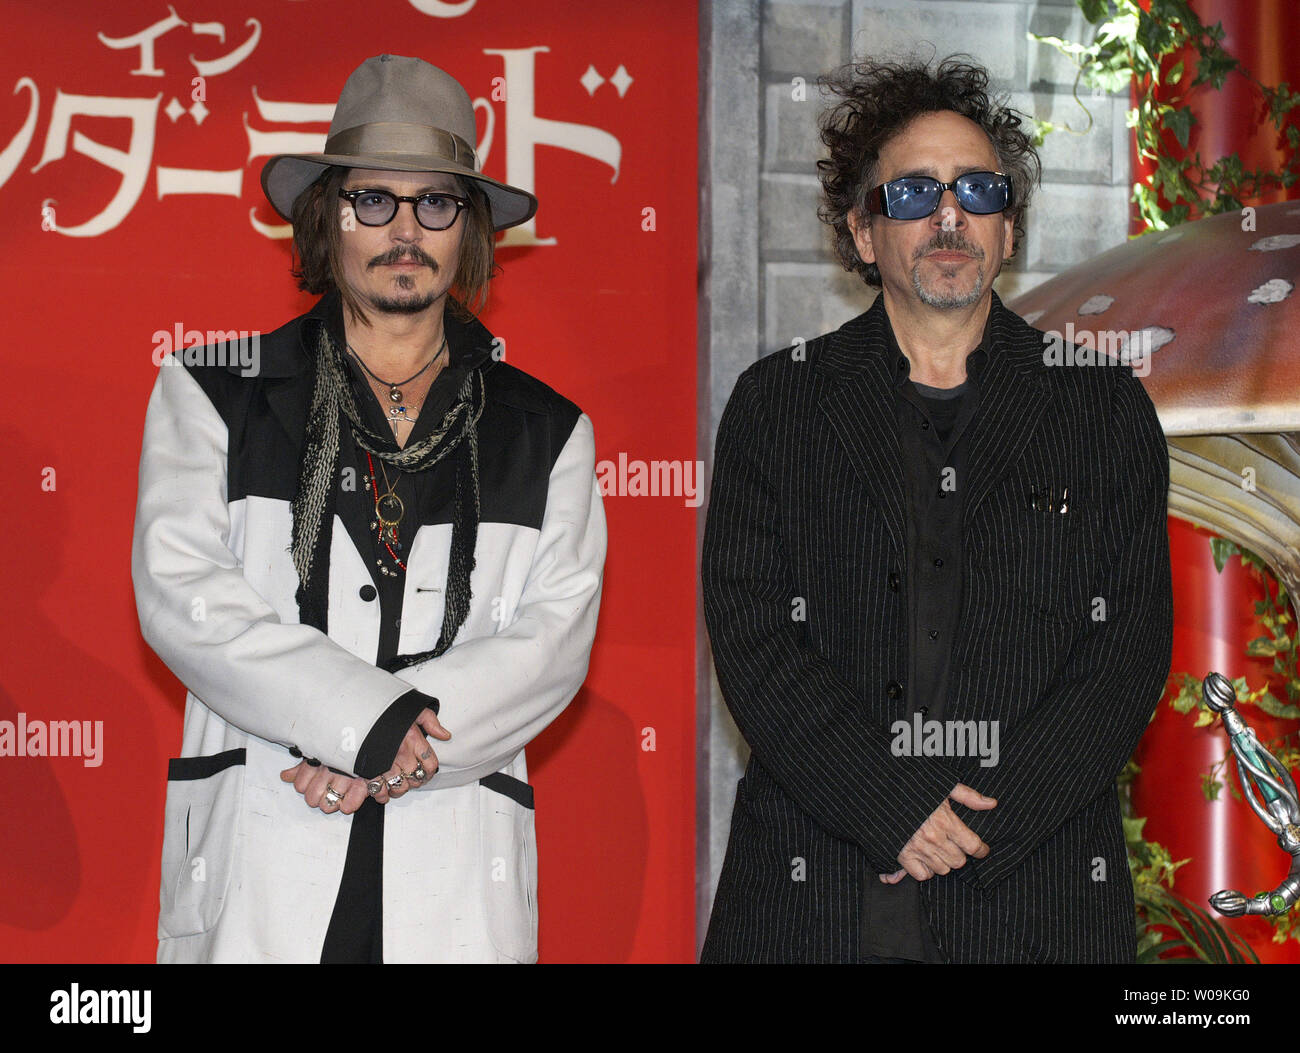 Actor Johnny Depp and film director Tim Burton attend a photo call event  for the premiere